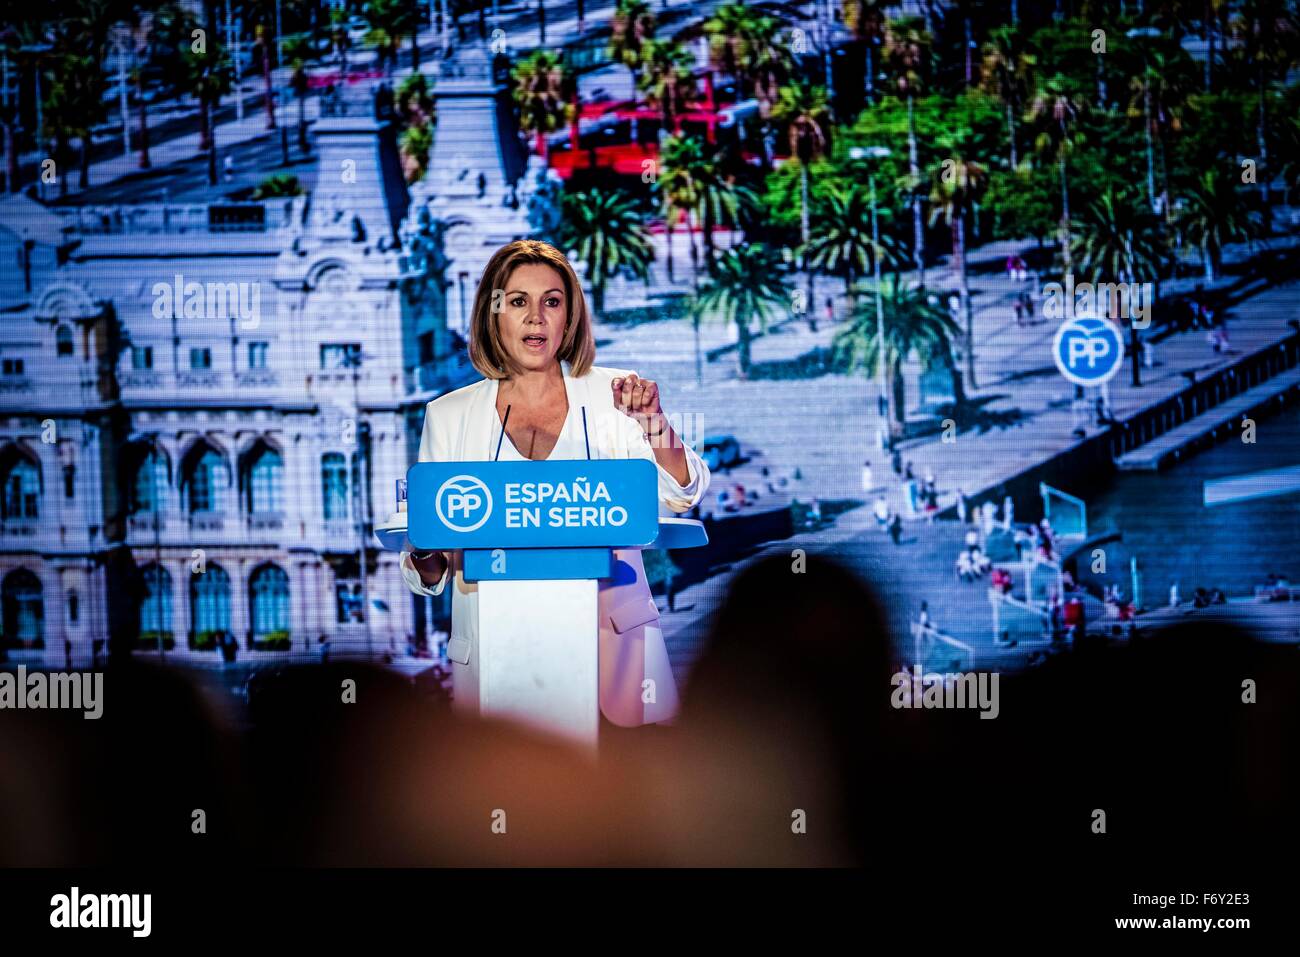 Barcelona, Spain. 21st Nov, 2015. Barcelona, Spain: MARIA DOLORES COSPEDAL, General Secretary of the PP (People's Party), addresses the audience during the presentation of the party's candidates for the general elections on December 20th Credit:  matthi/Alamy Live News Stock Photo